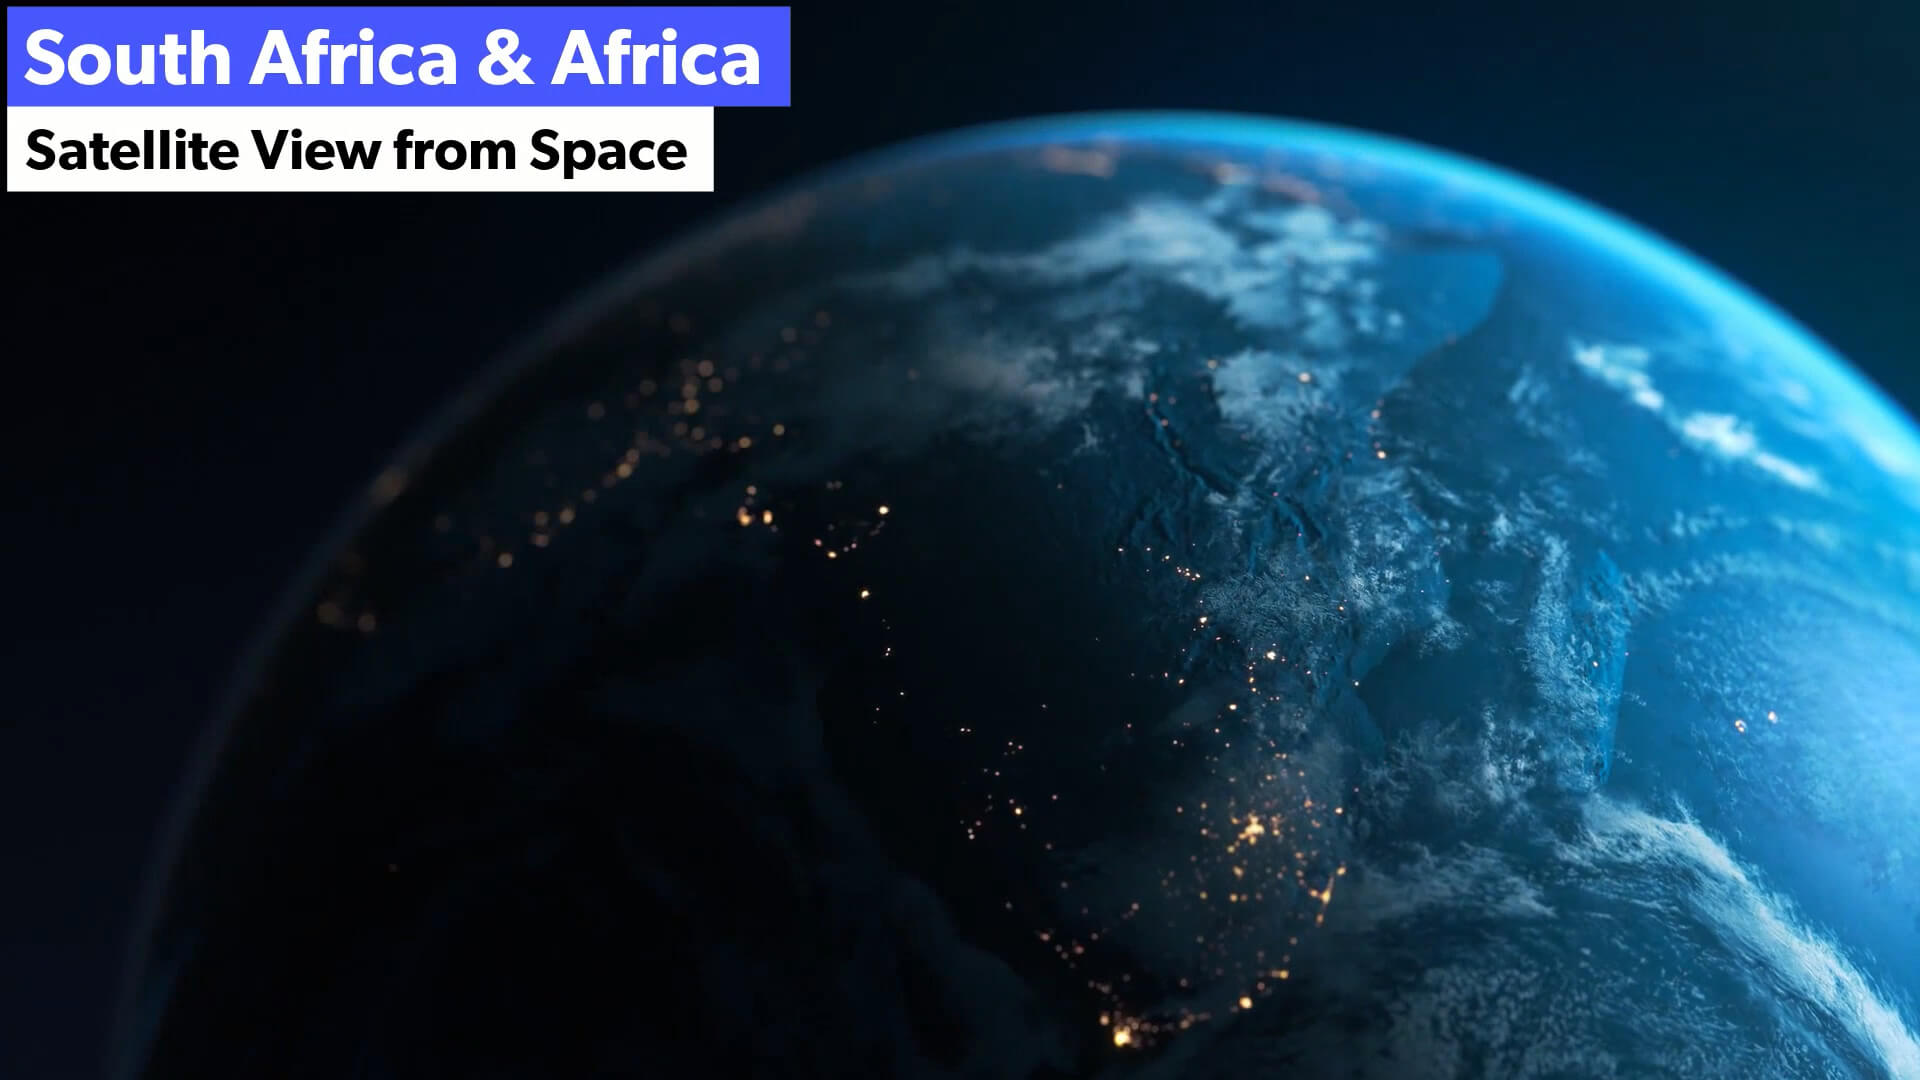 South Africa and Africa Satellite View